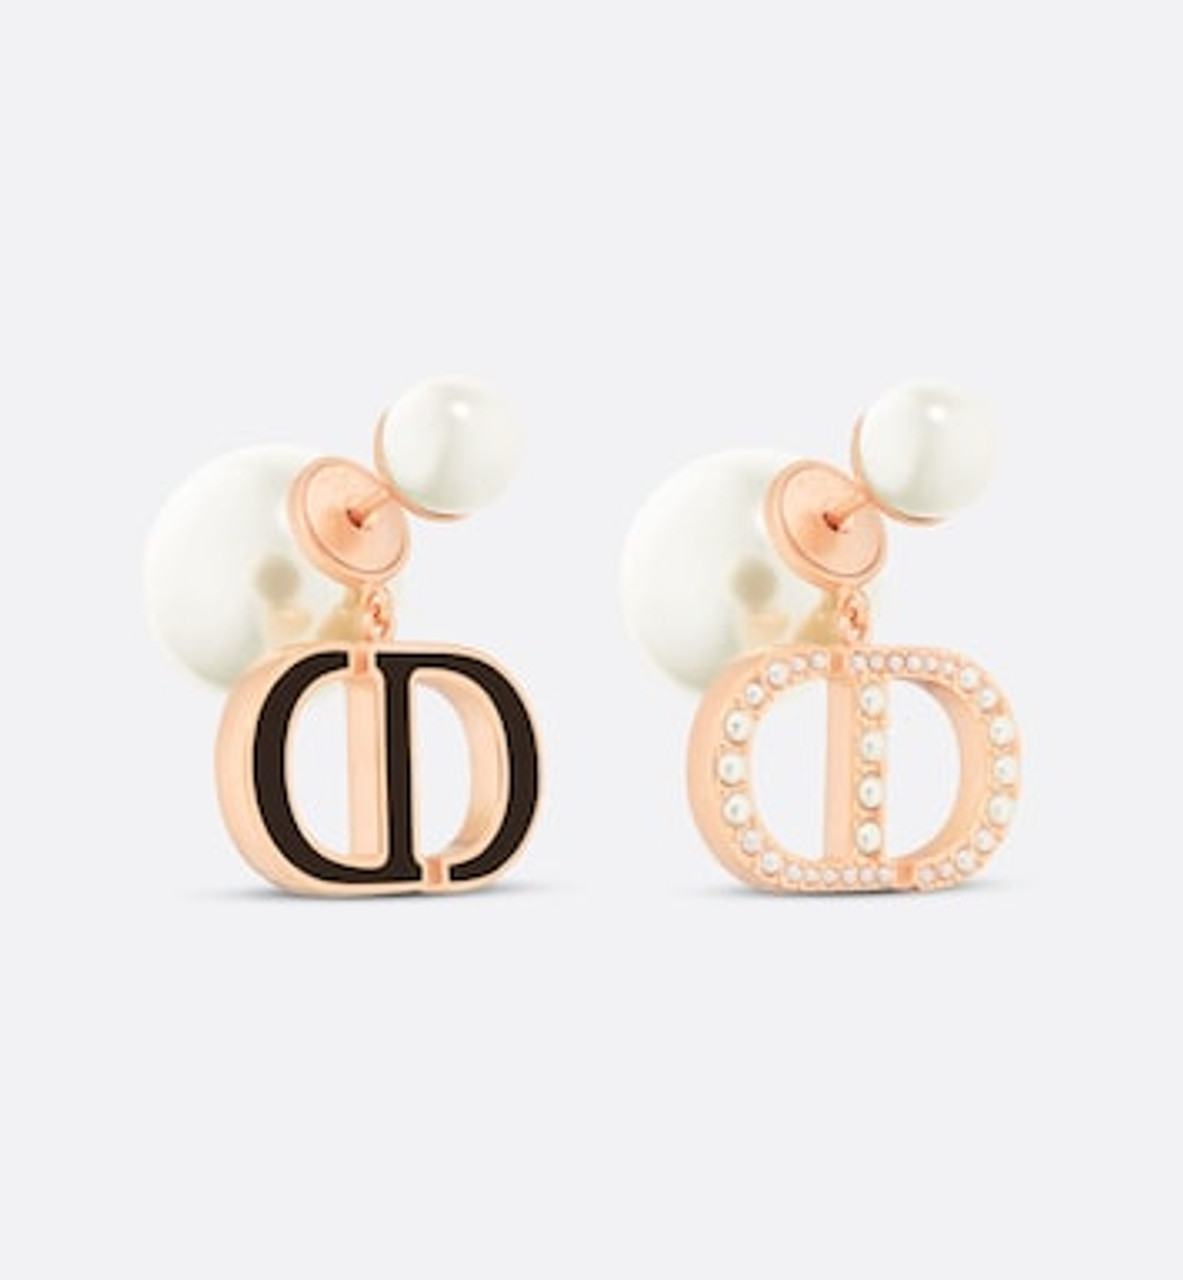 30 Montaigne Earrings Gold-Finish Metal and White Resin Pearls